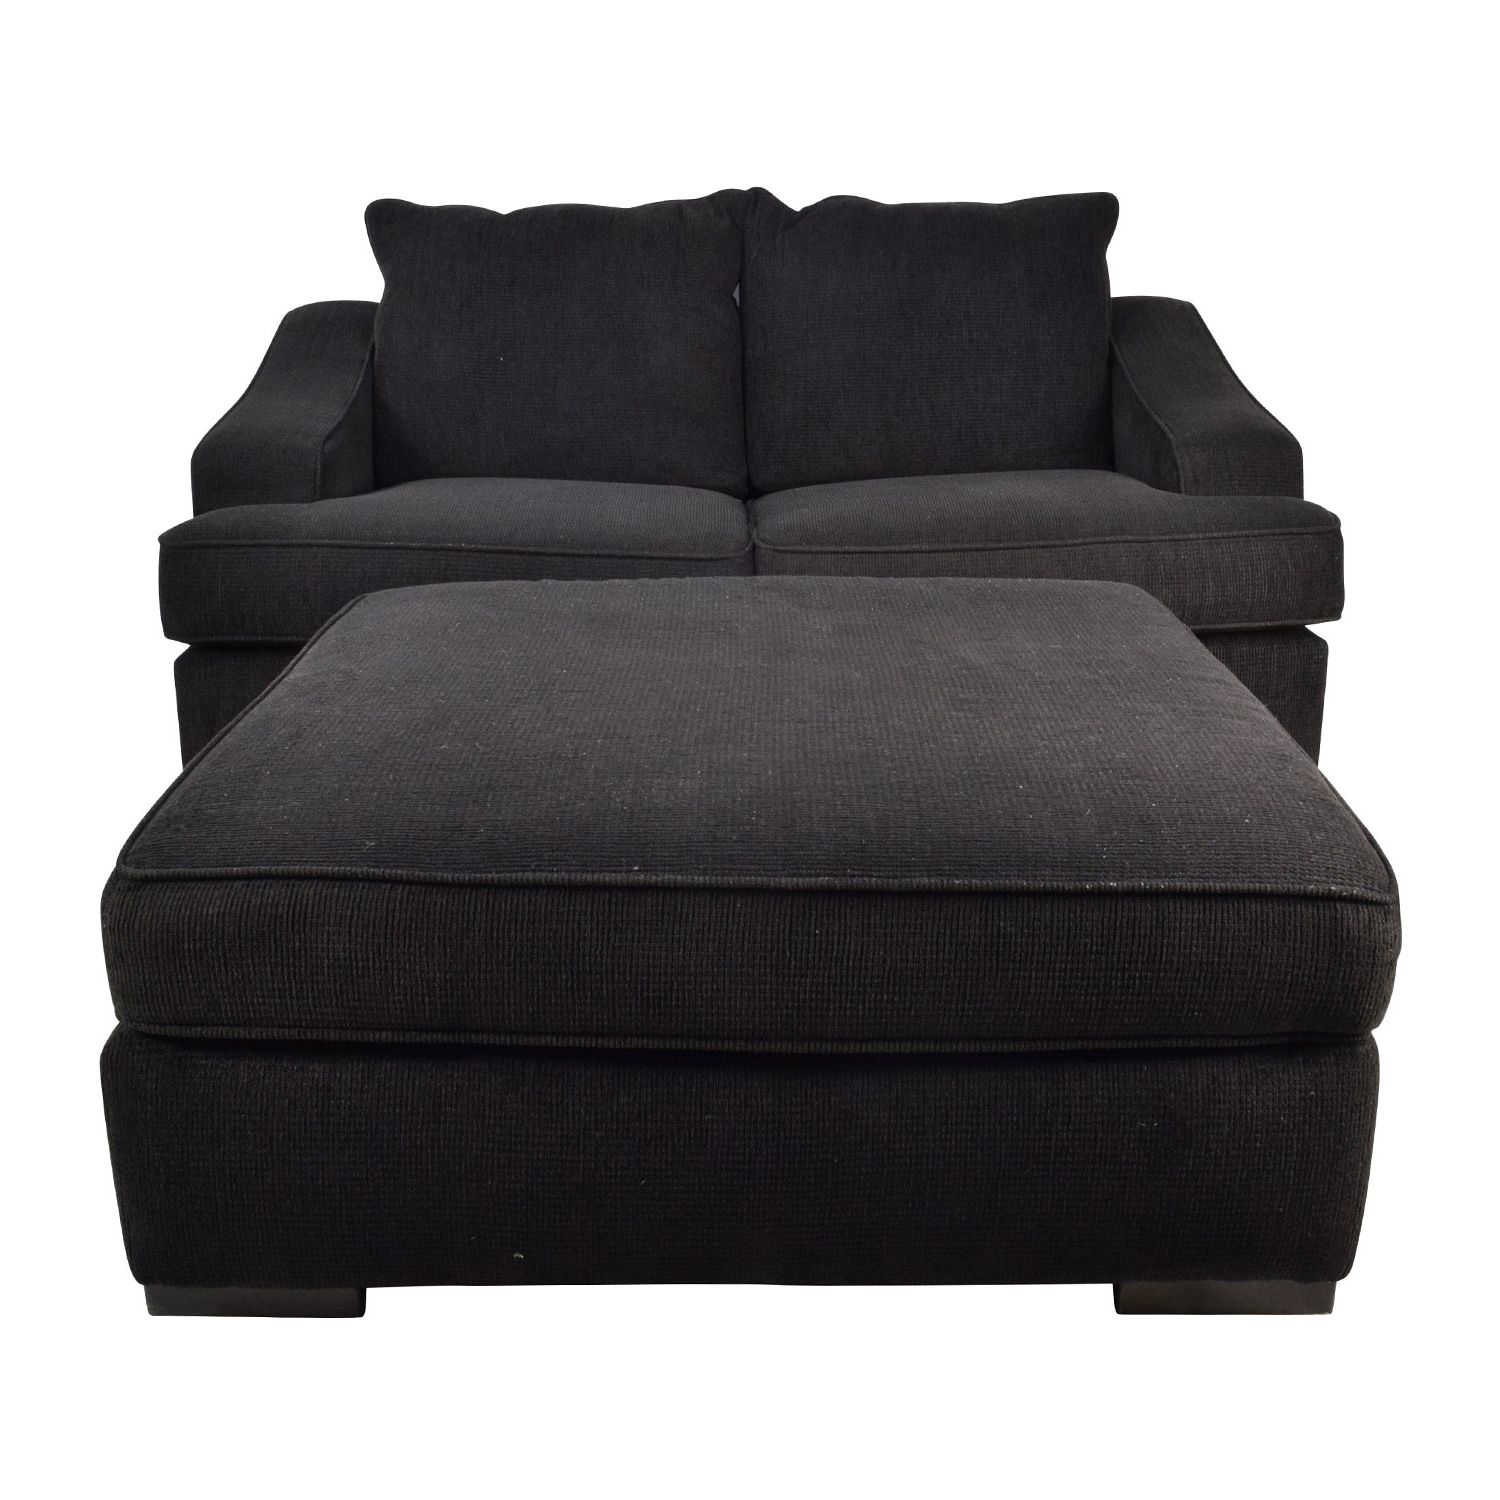 [%67% Off – Black Cloth Loveseat And Matching Oversized Ottoman / Sofas Intended For Newest Loveseats With Ottoman|Loveseats With Ottoman In Current 67% Off – Black Cloth Loveseat And Matching Oversized Ottoman / Sofas|Well Known Loveseats With Ottoman With Regard To 67% Off – Black Cloth Loveseat And Matching Oversized Ottoman / Sofas|2017 67% Off – Black Cloth Loveseat And Matching Oversized Ottoman / Sofas With Regard To Loveseats With Ottoman%] (View 12 of 15)